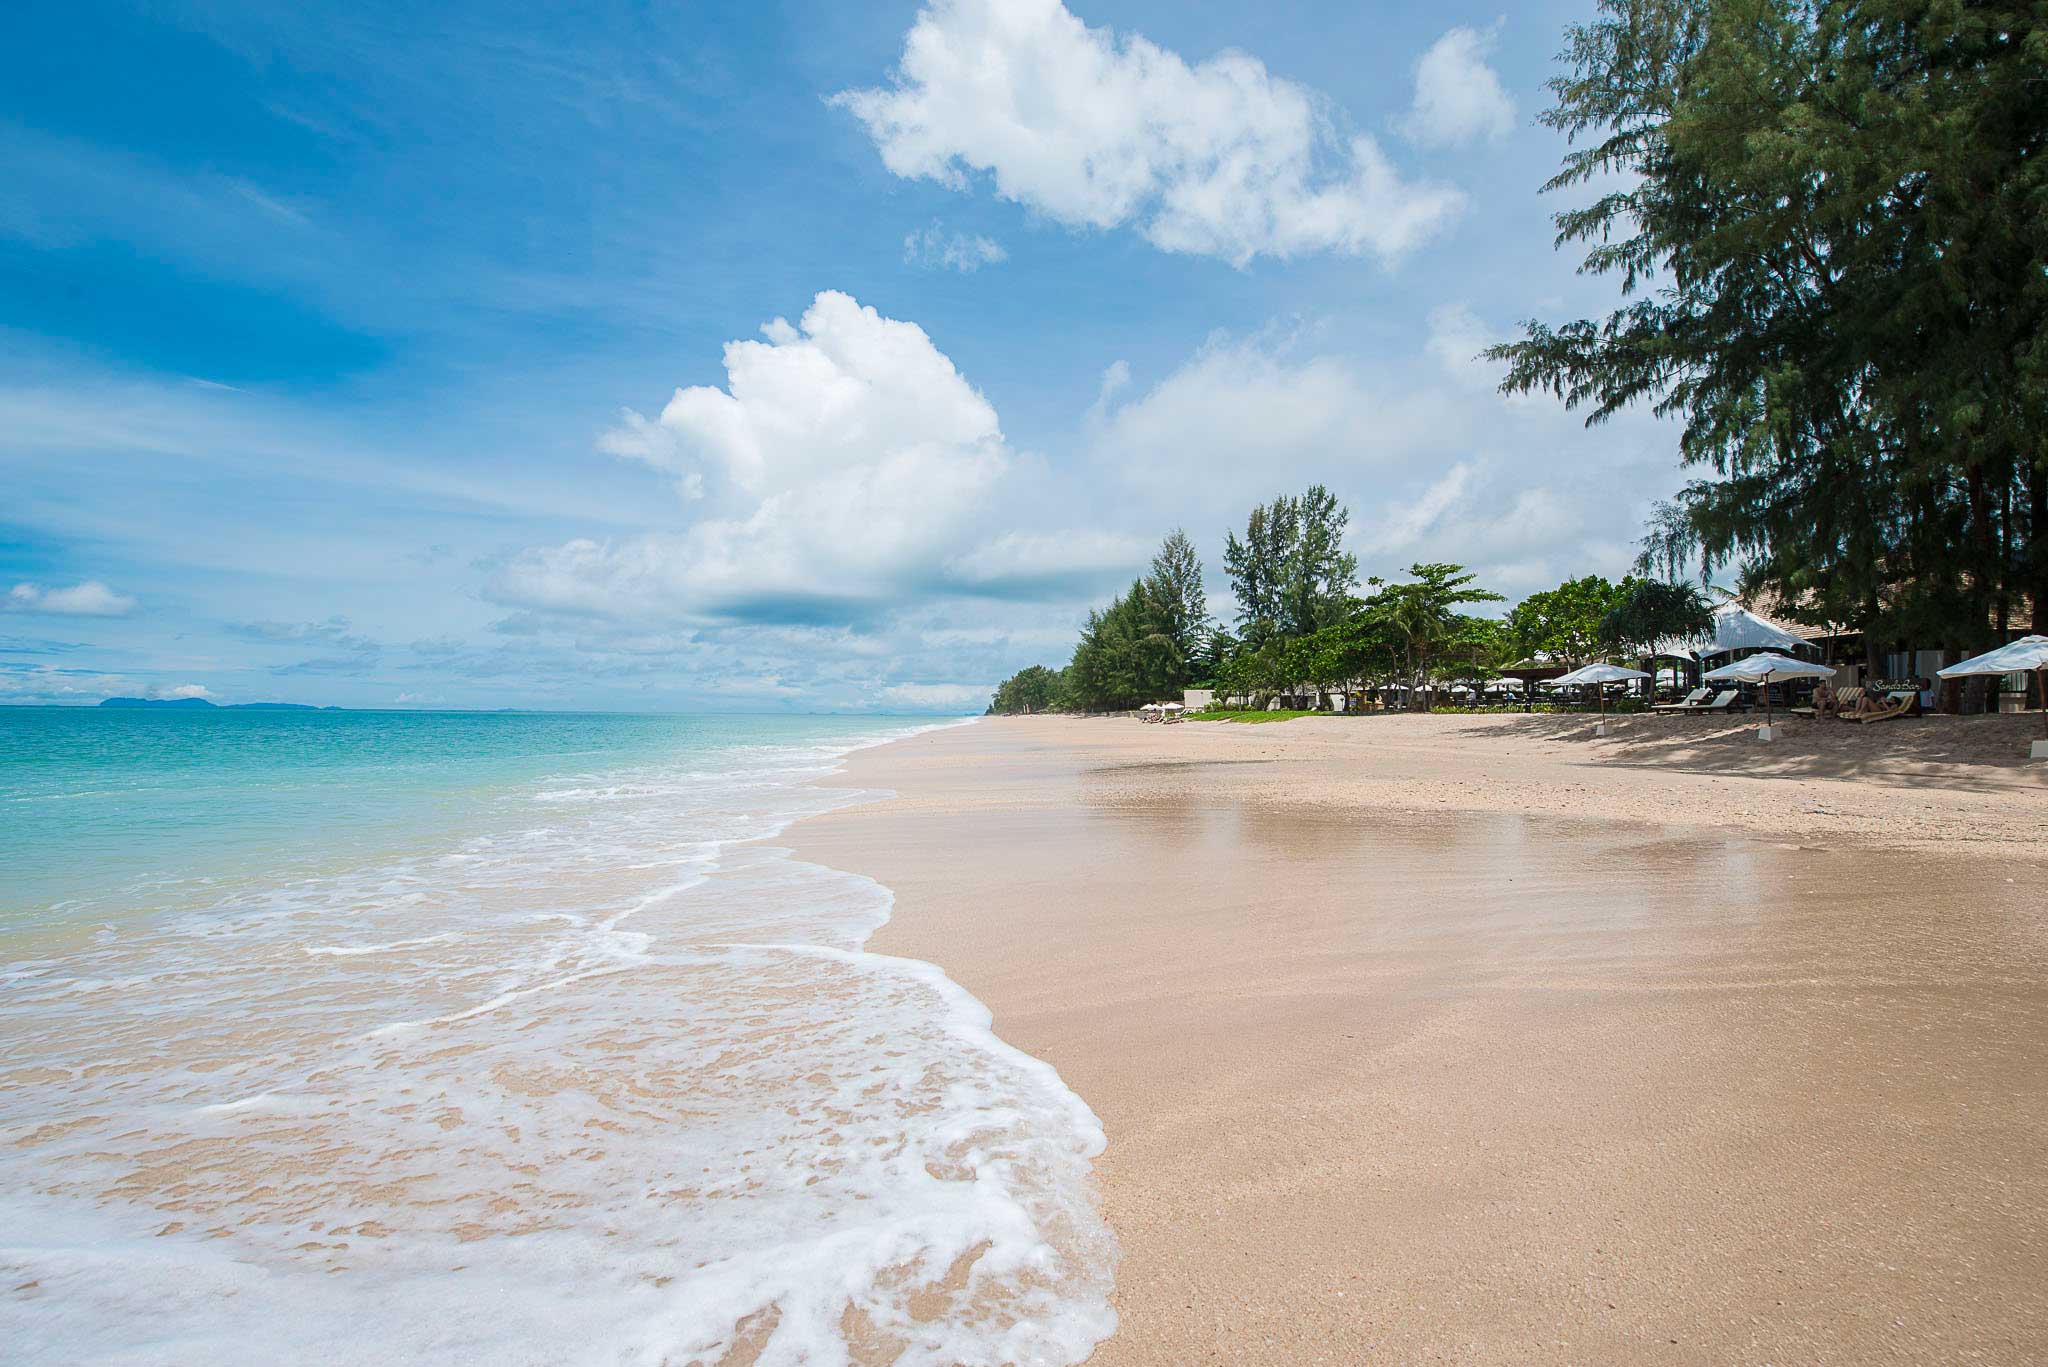 Sea foam from waves swirling up to a pristine, flat sandy beach, Thailand